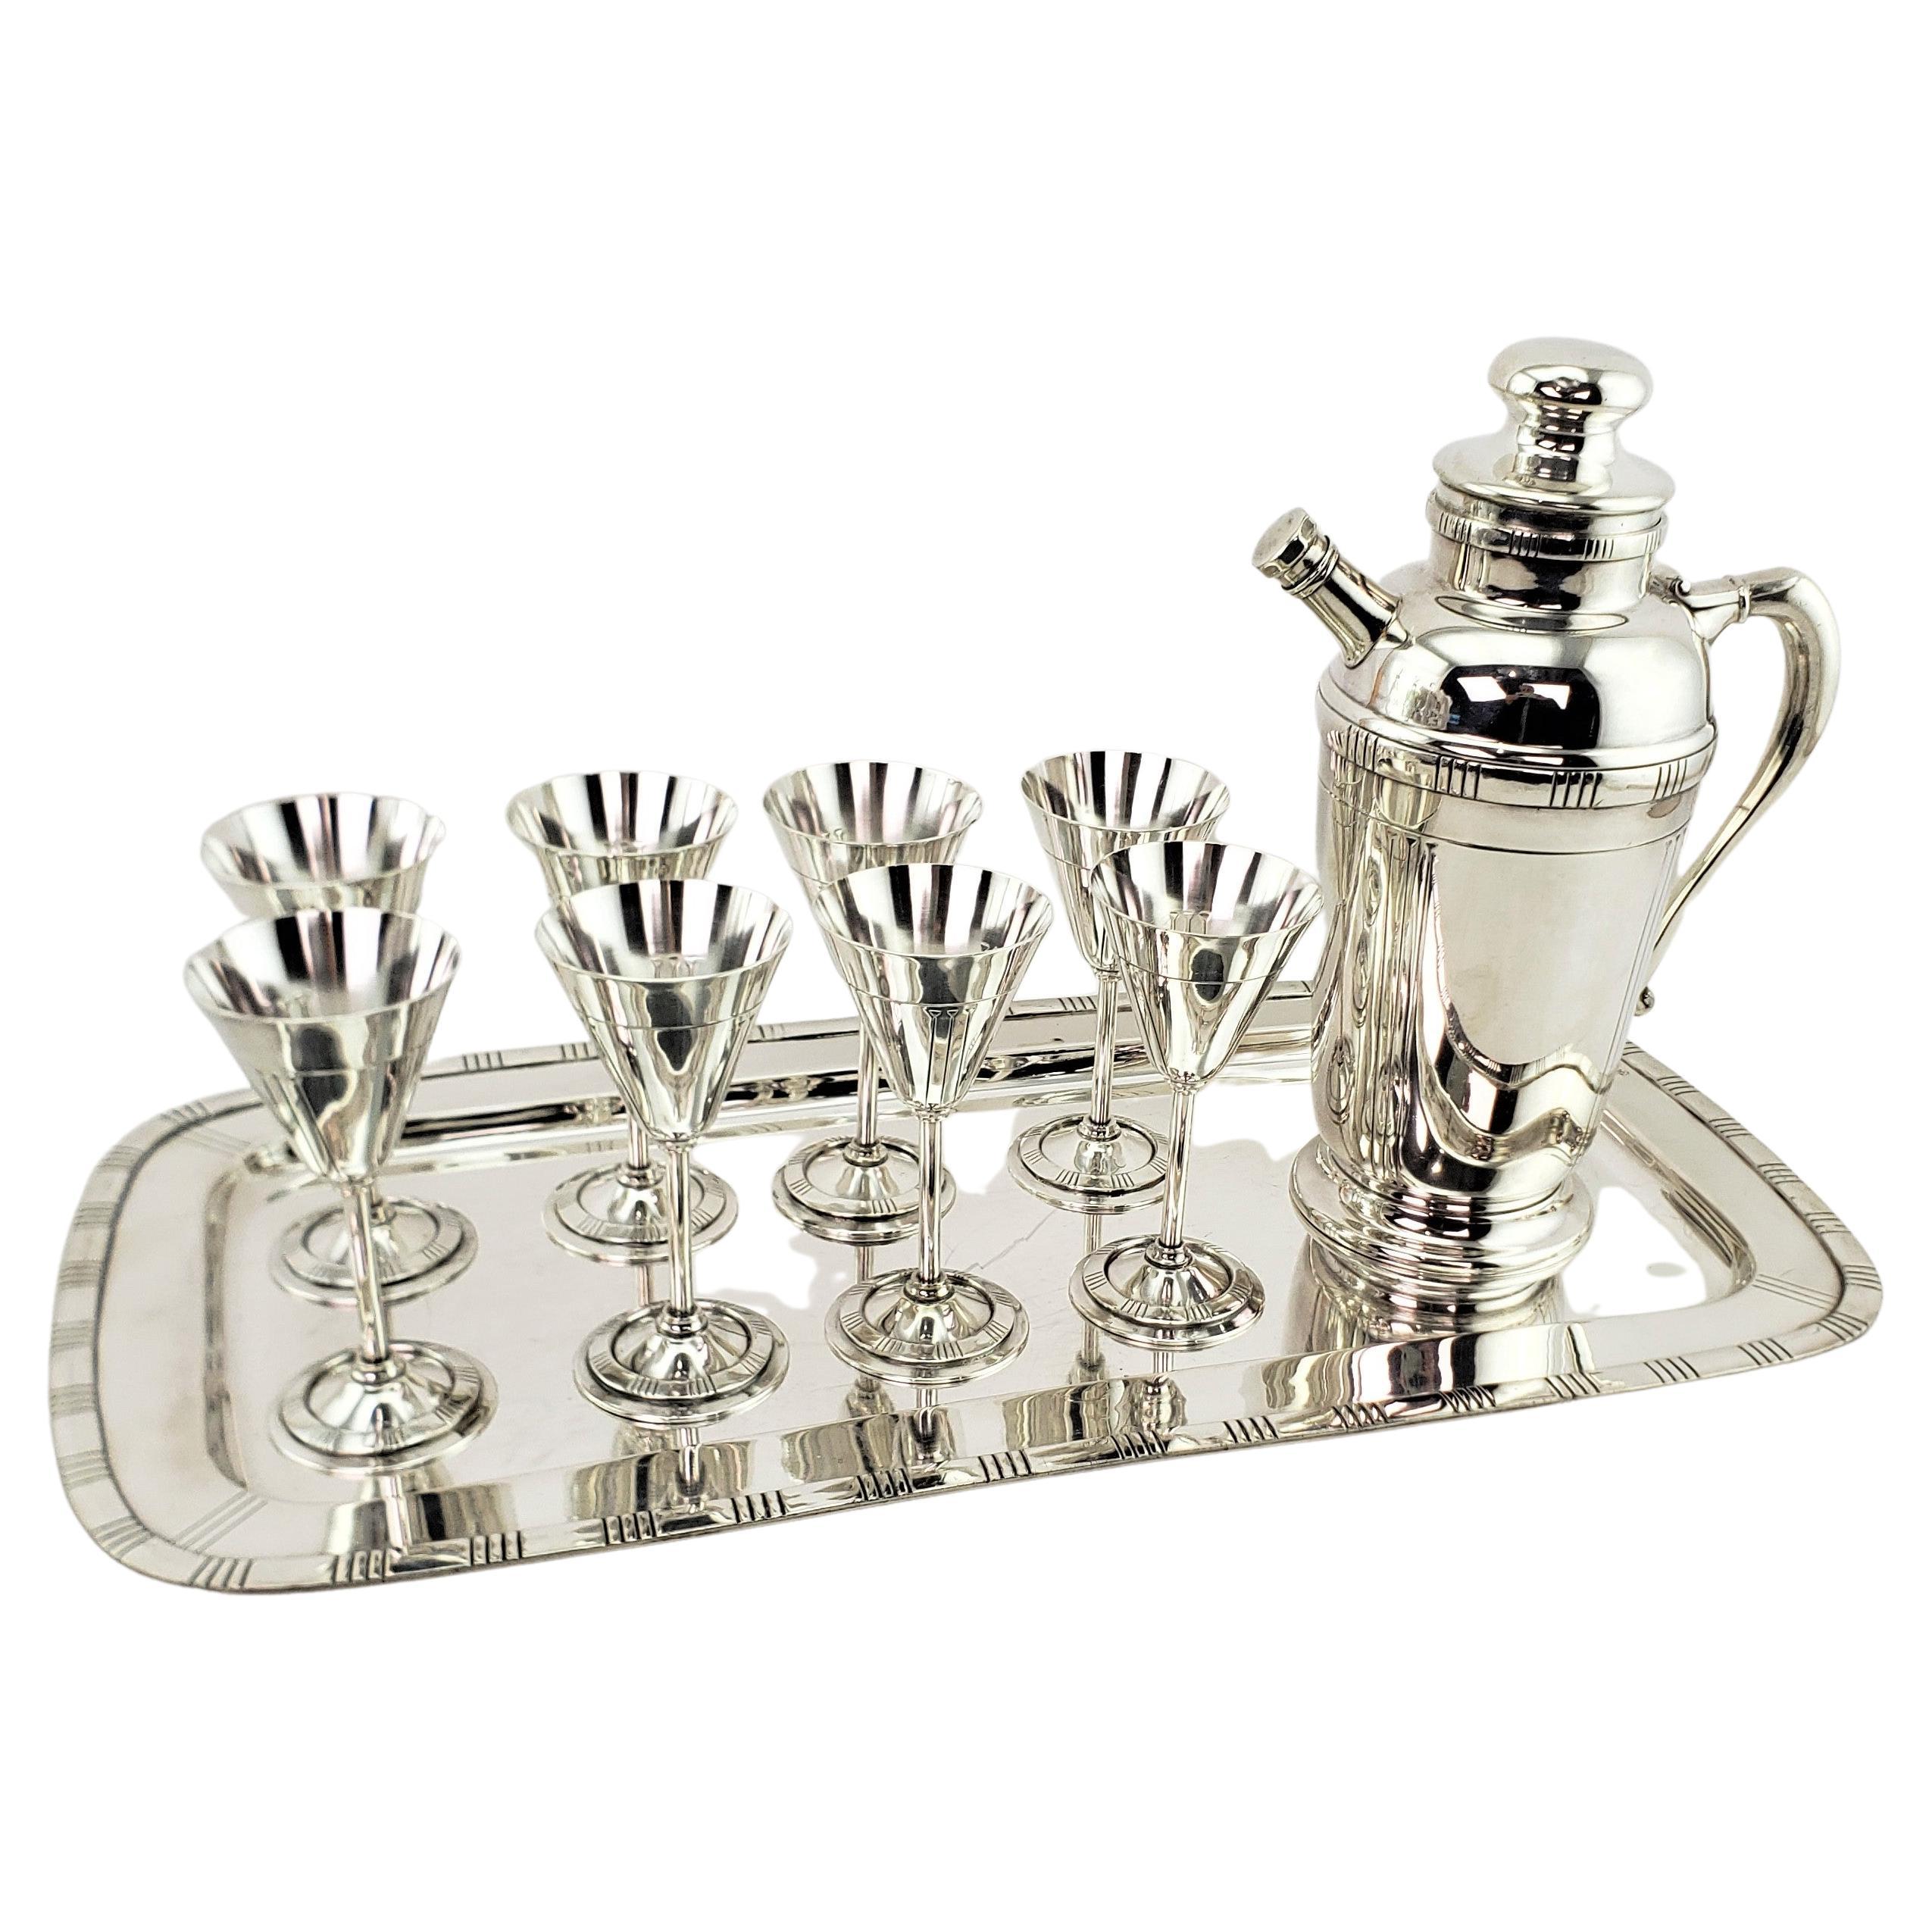 Midcentury Silver Plated Cocktail Set with Tray, Glasses & Shaker Pitcher